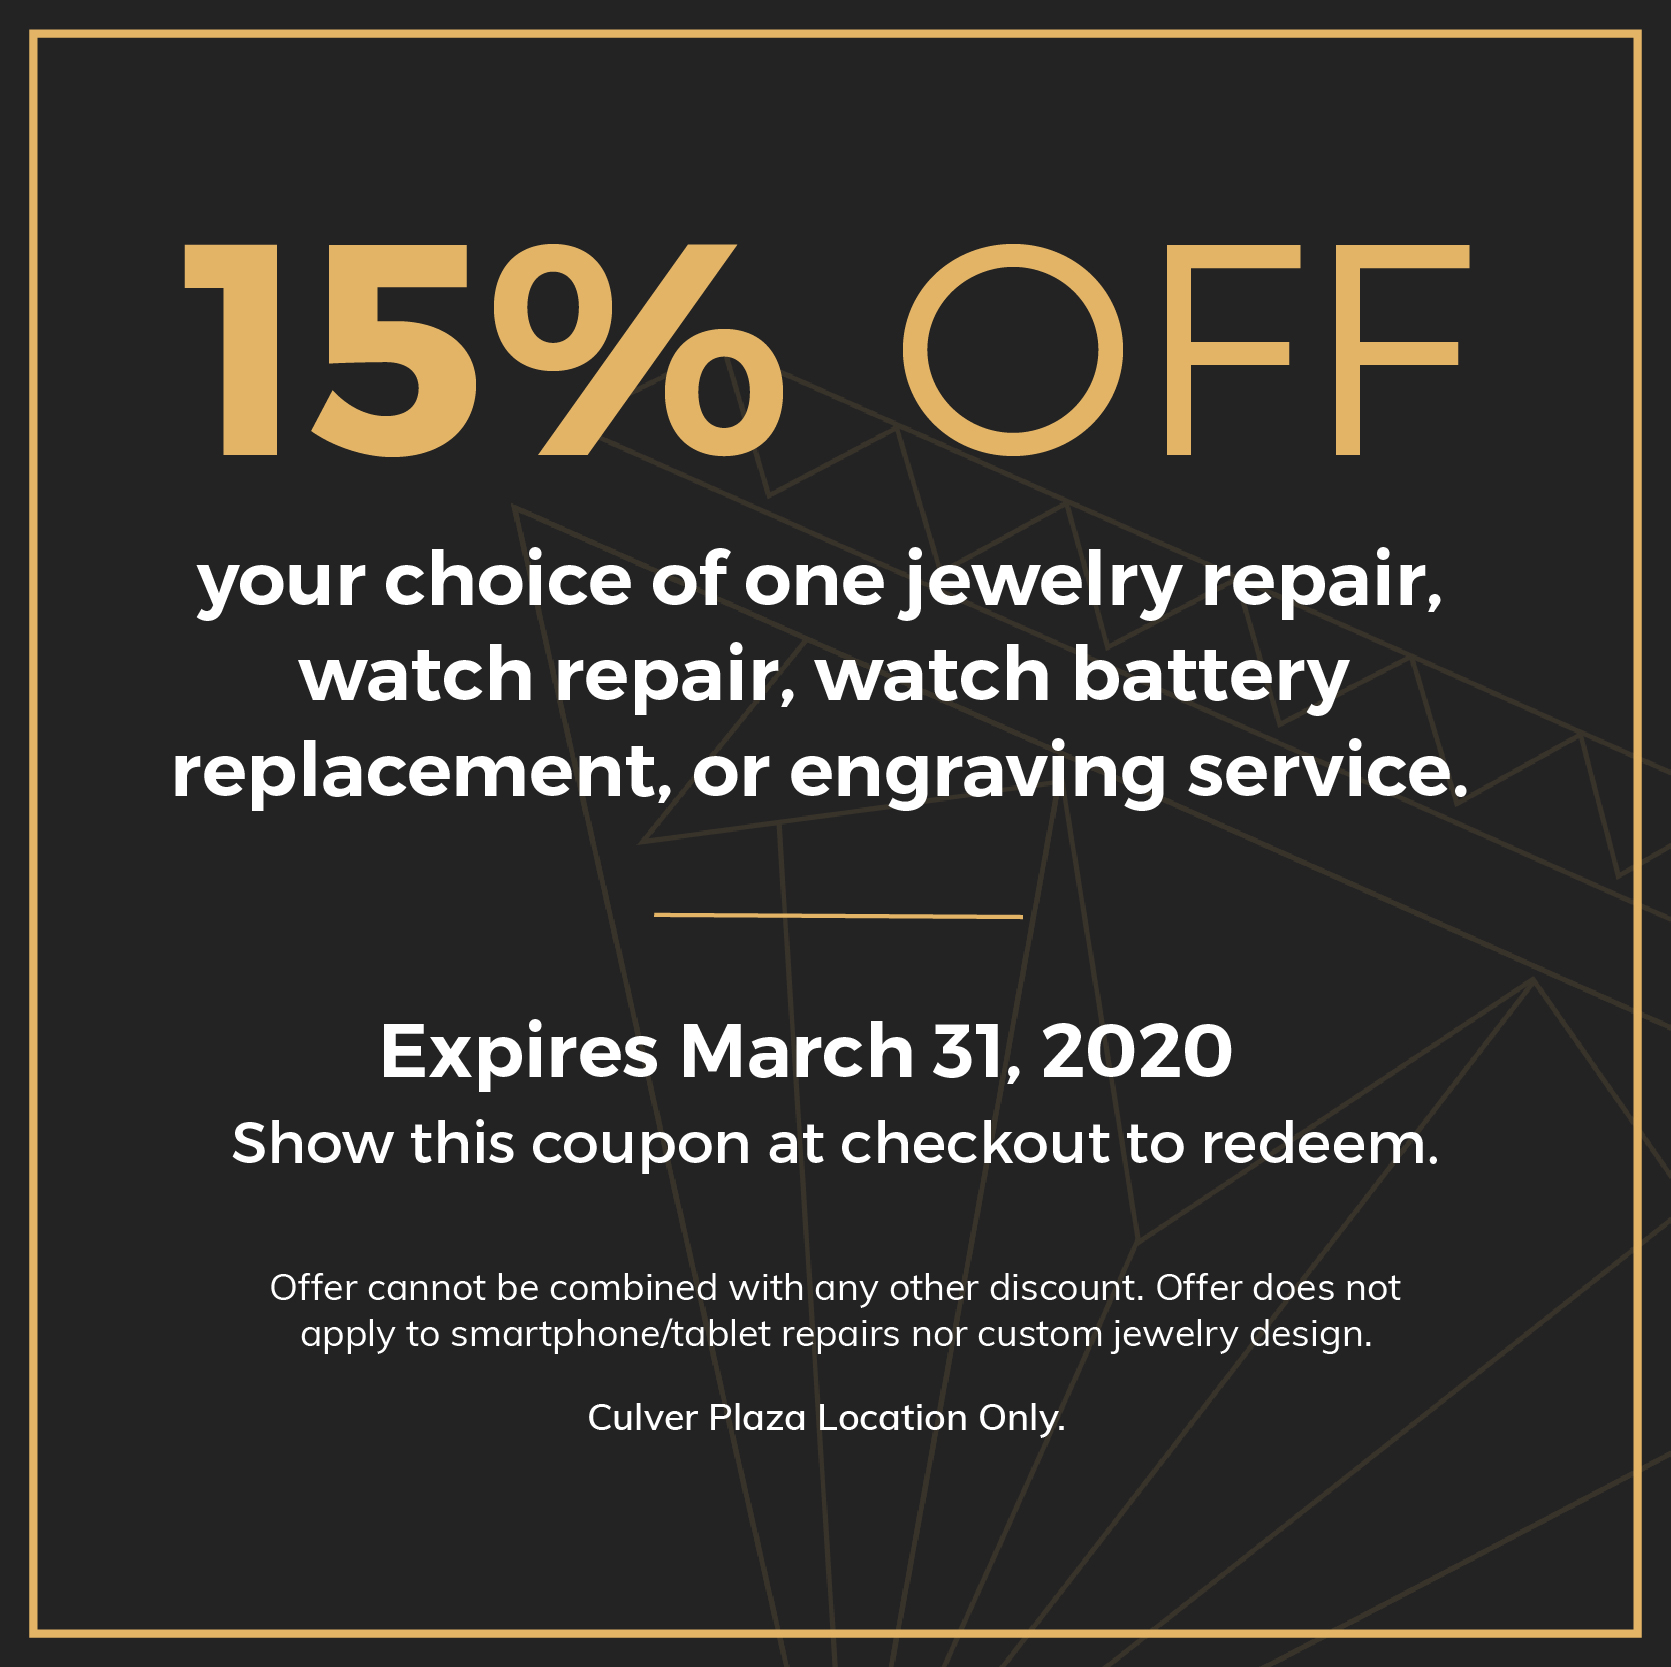 15% OFF. your choice of one jewelry repair, watch repair, watch battery replacement, or engraving service. Expires March 31, 2020. Show this coupon at checkout to redeem. Offer cannot be combined with any other discount. Offer does not apply to smartphone/tablet repairs nor custom jewelry design. Culver Plaza Location Only.